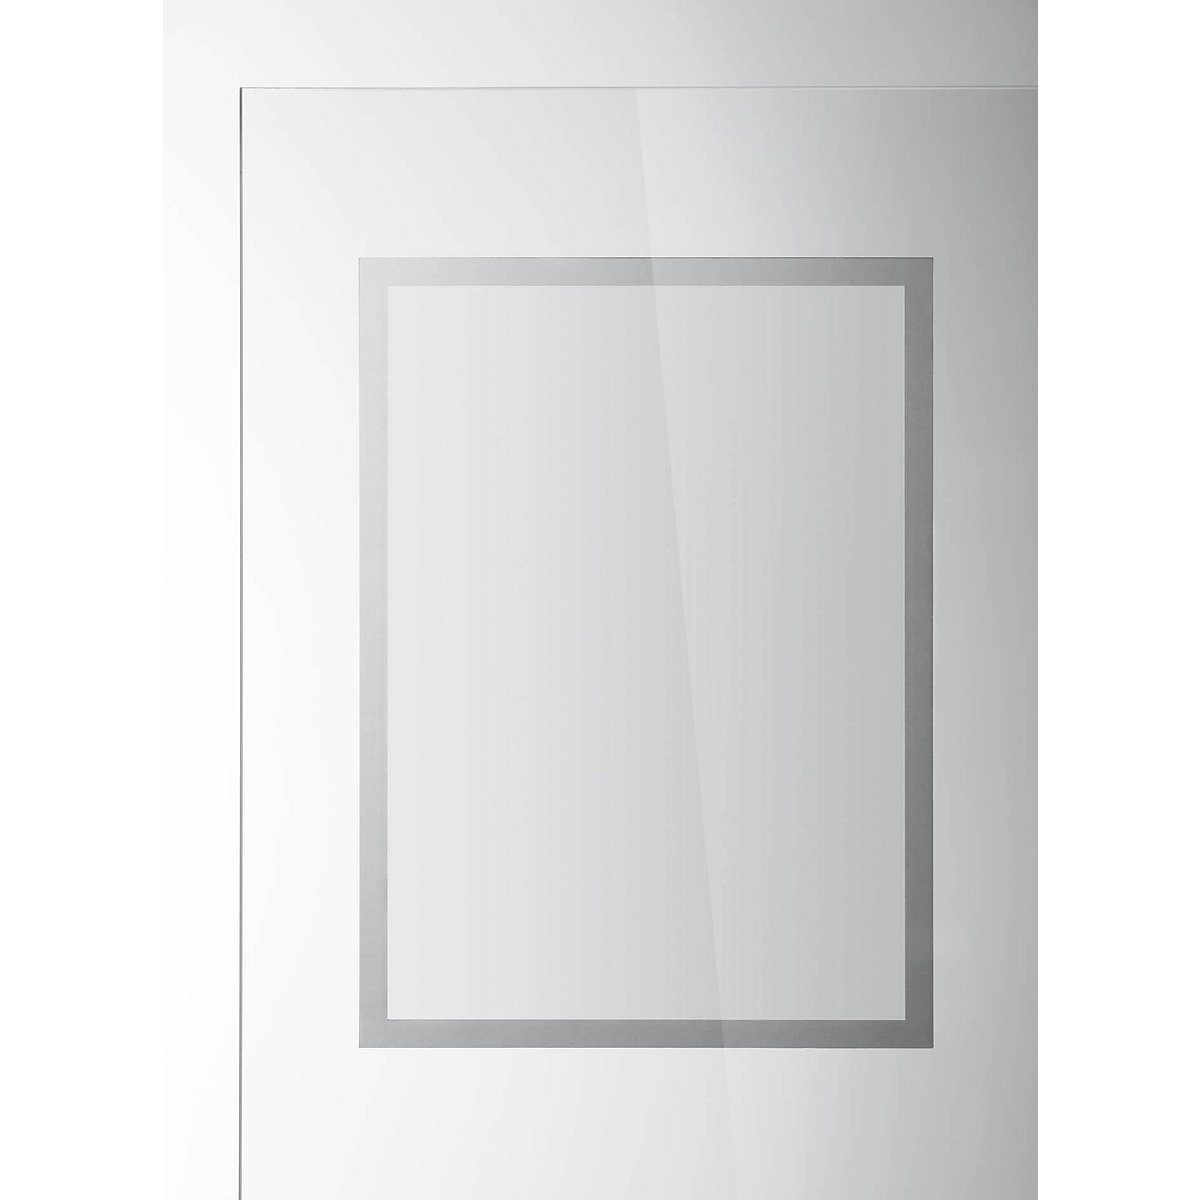 DURAFRAME® SUN foil frame, non-adhesive – DURABLE, A3 format, pack of 6, silver-4